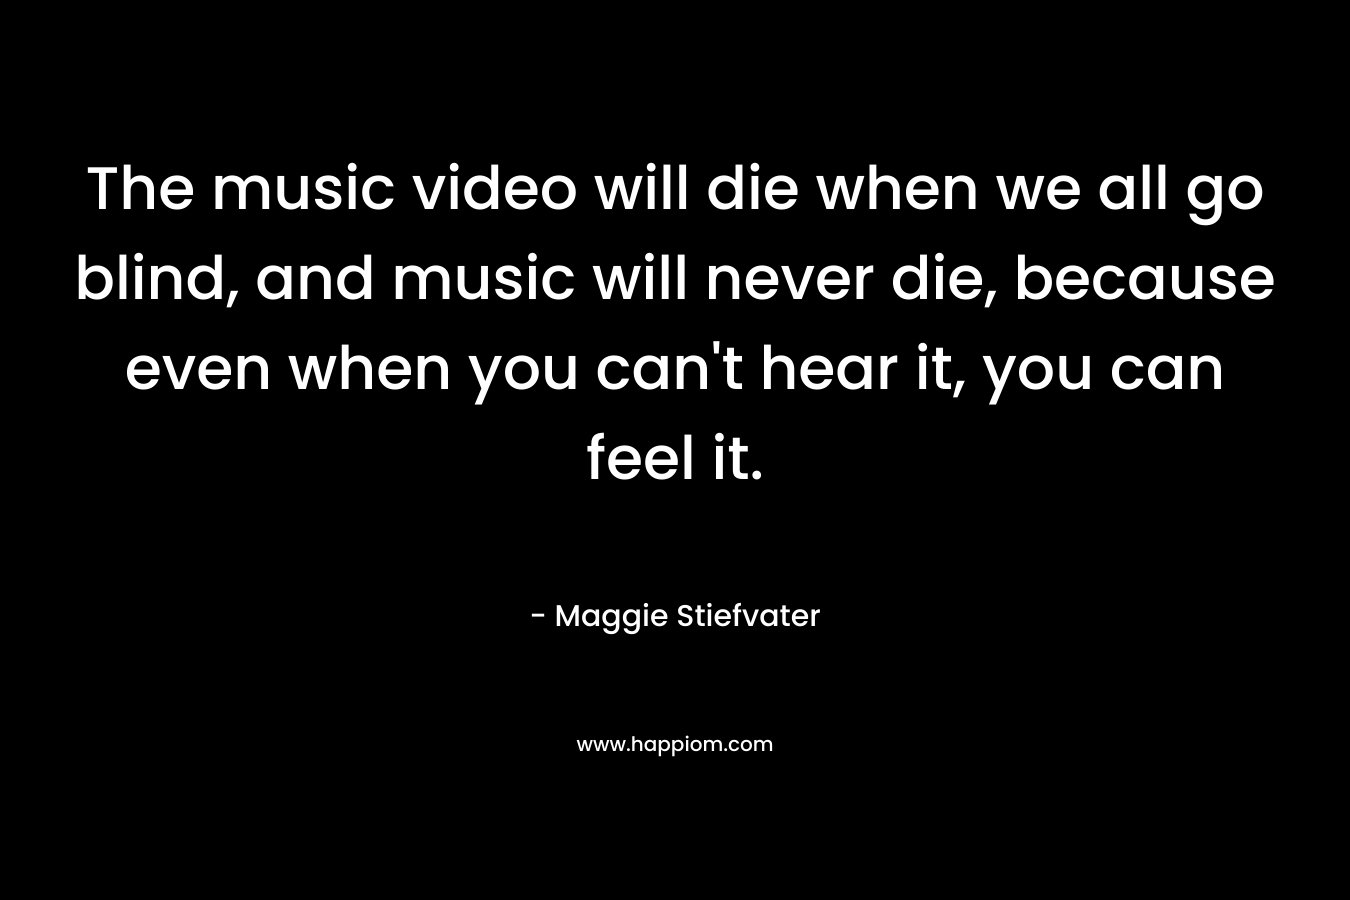 The music video will die when we all go blind, and music will never die, because even when you can't hear it, you can feel it.